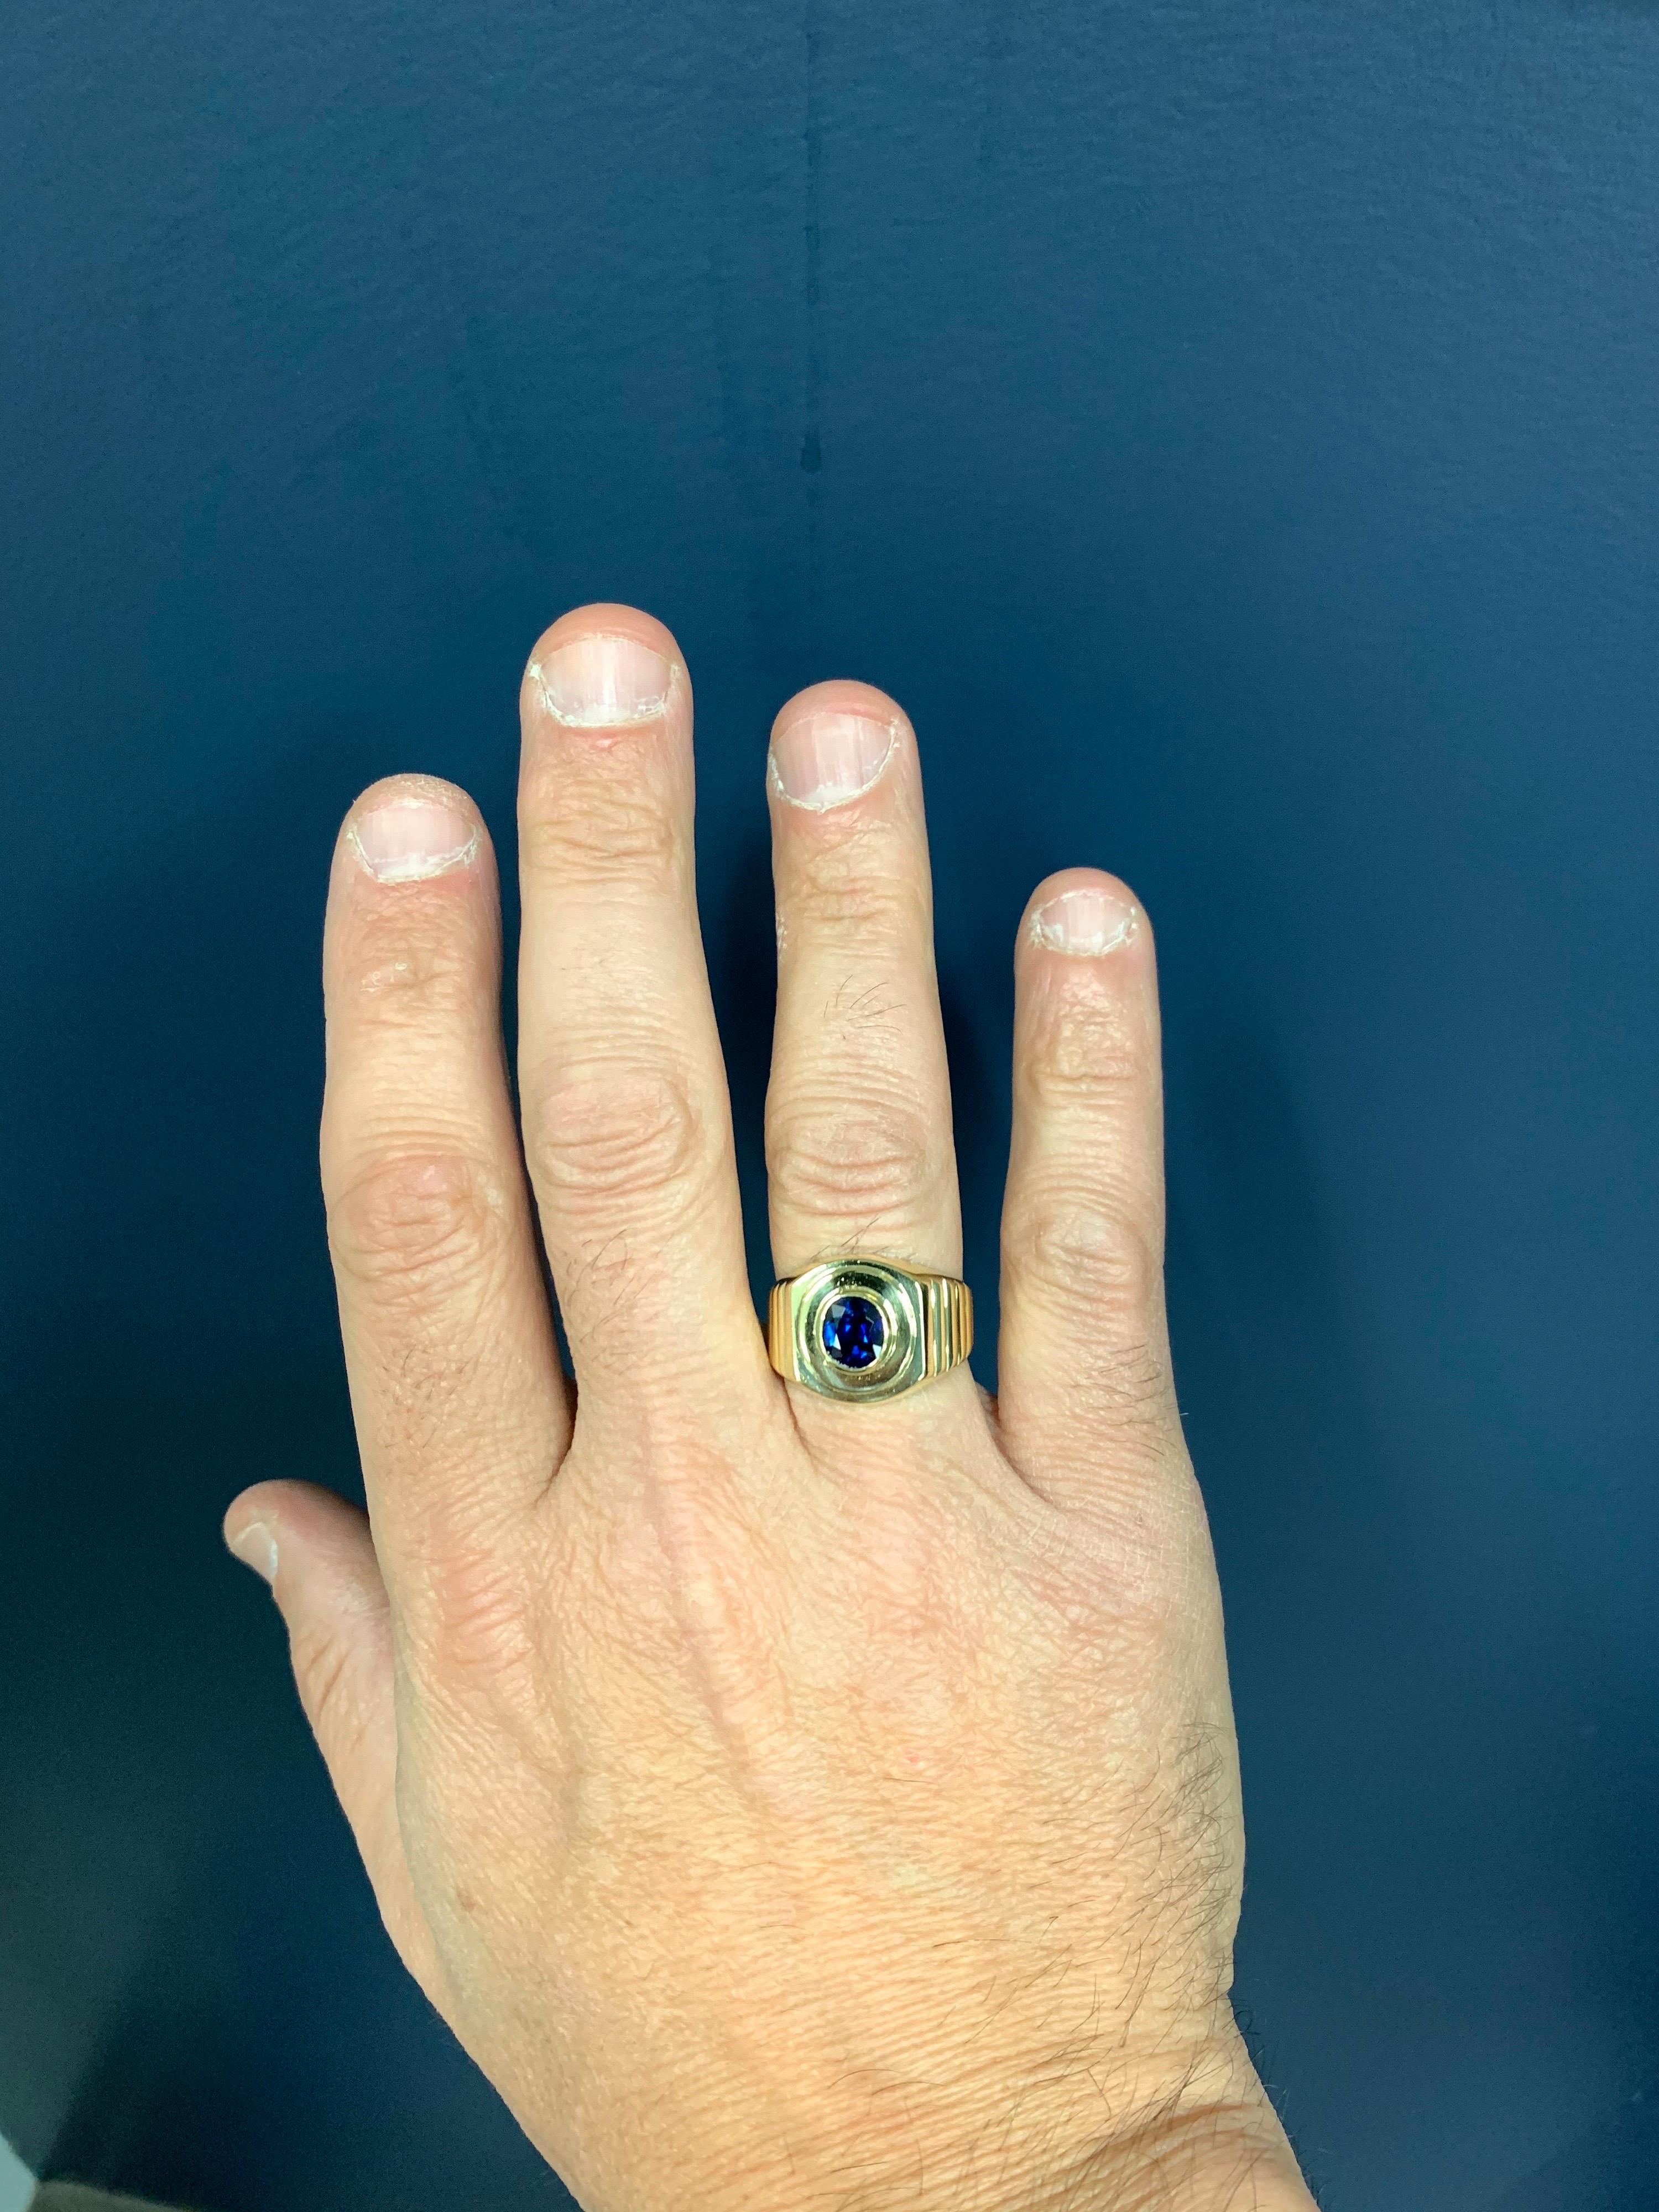 Men’s Retro 18k Yellow Gold Estate Ring.

Set with a 2 Carat (approximate) Cushion Natural Deep Blue Sapphire Gem Stone measuring approximately 8x6.9x4.3mm.

The stone is heated and most likely with origins from Thailand. 

The weight is 13.6 grams